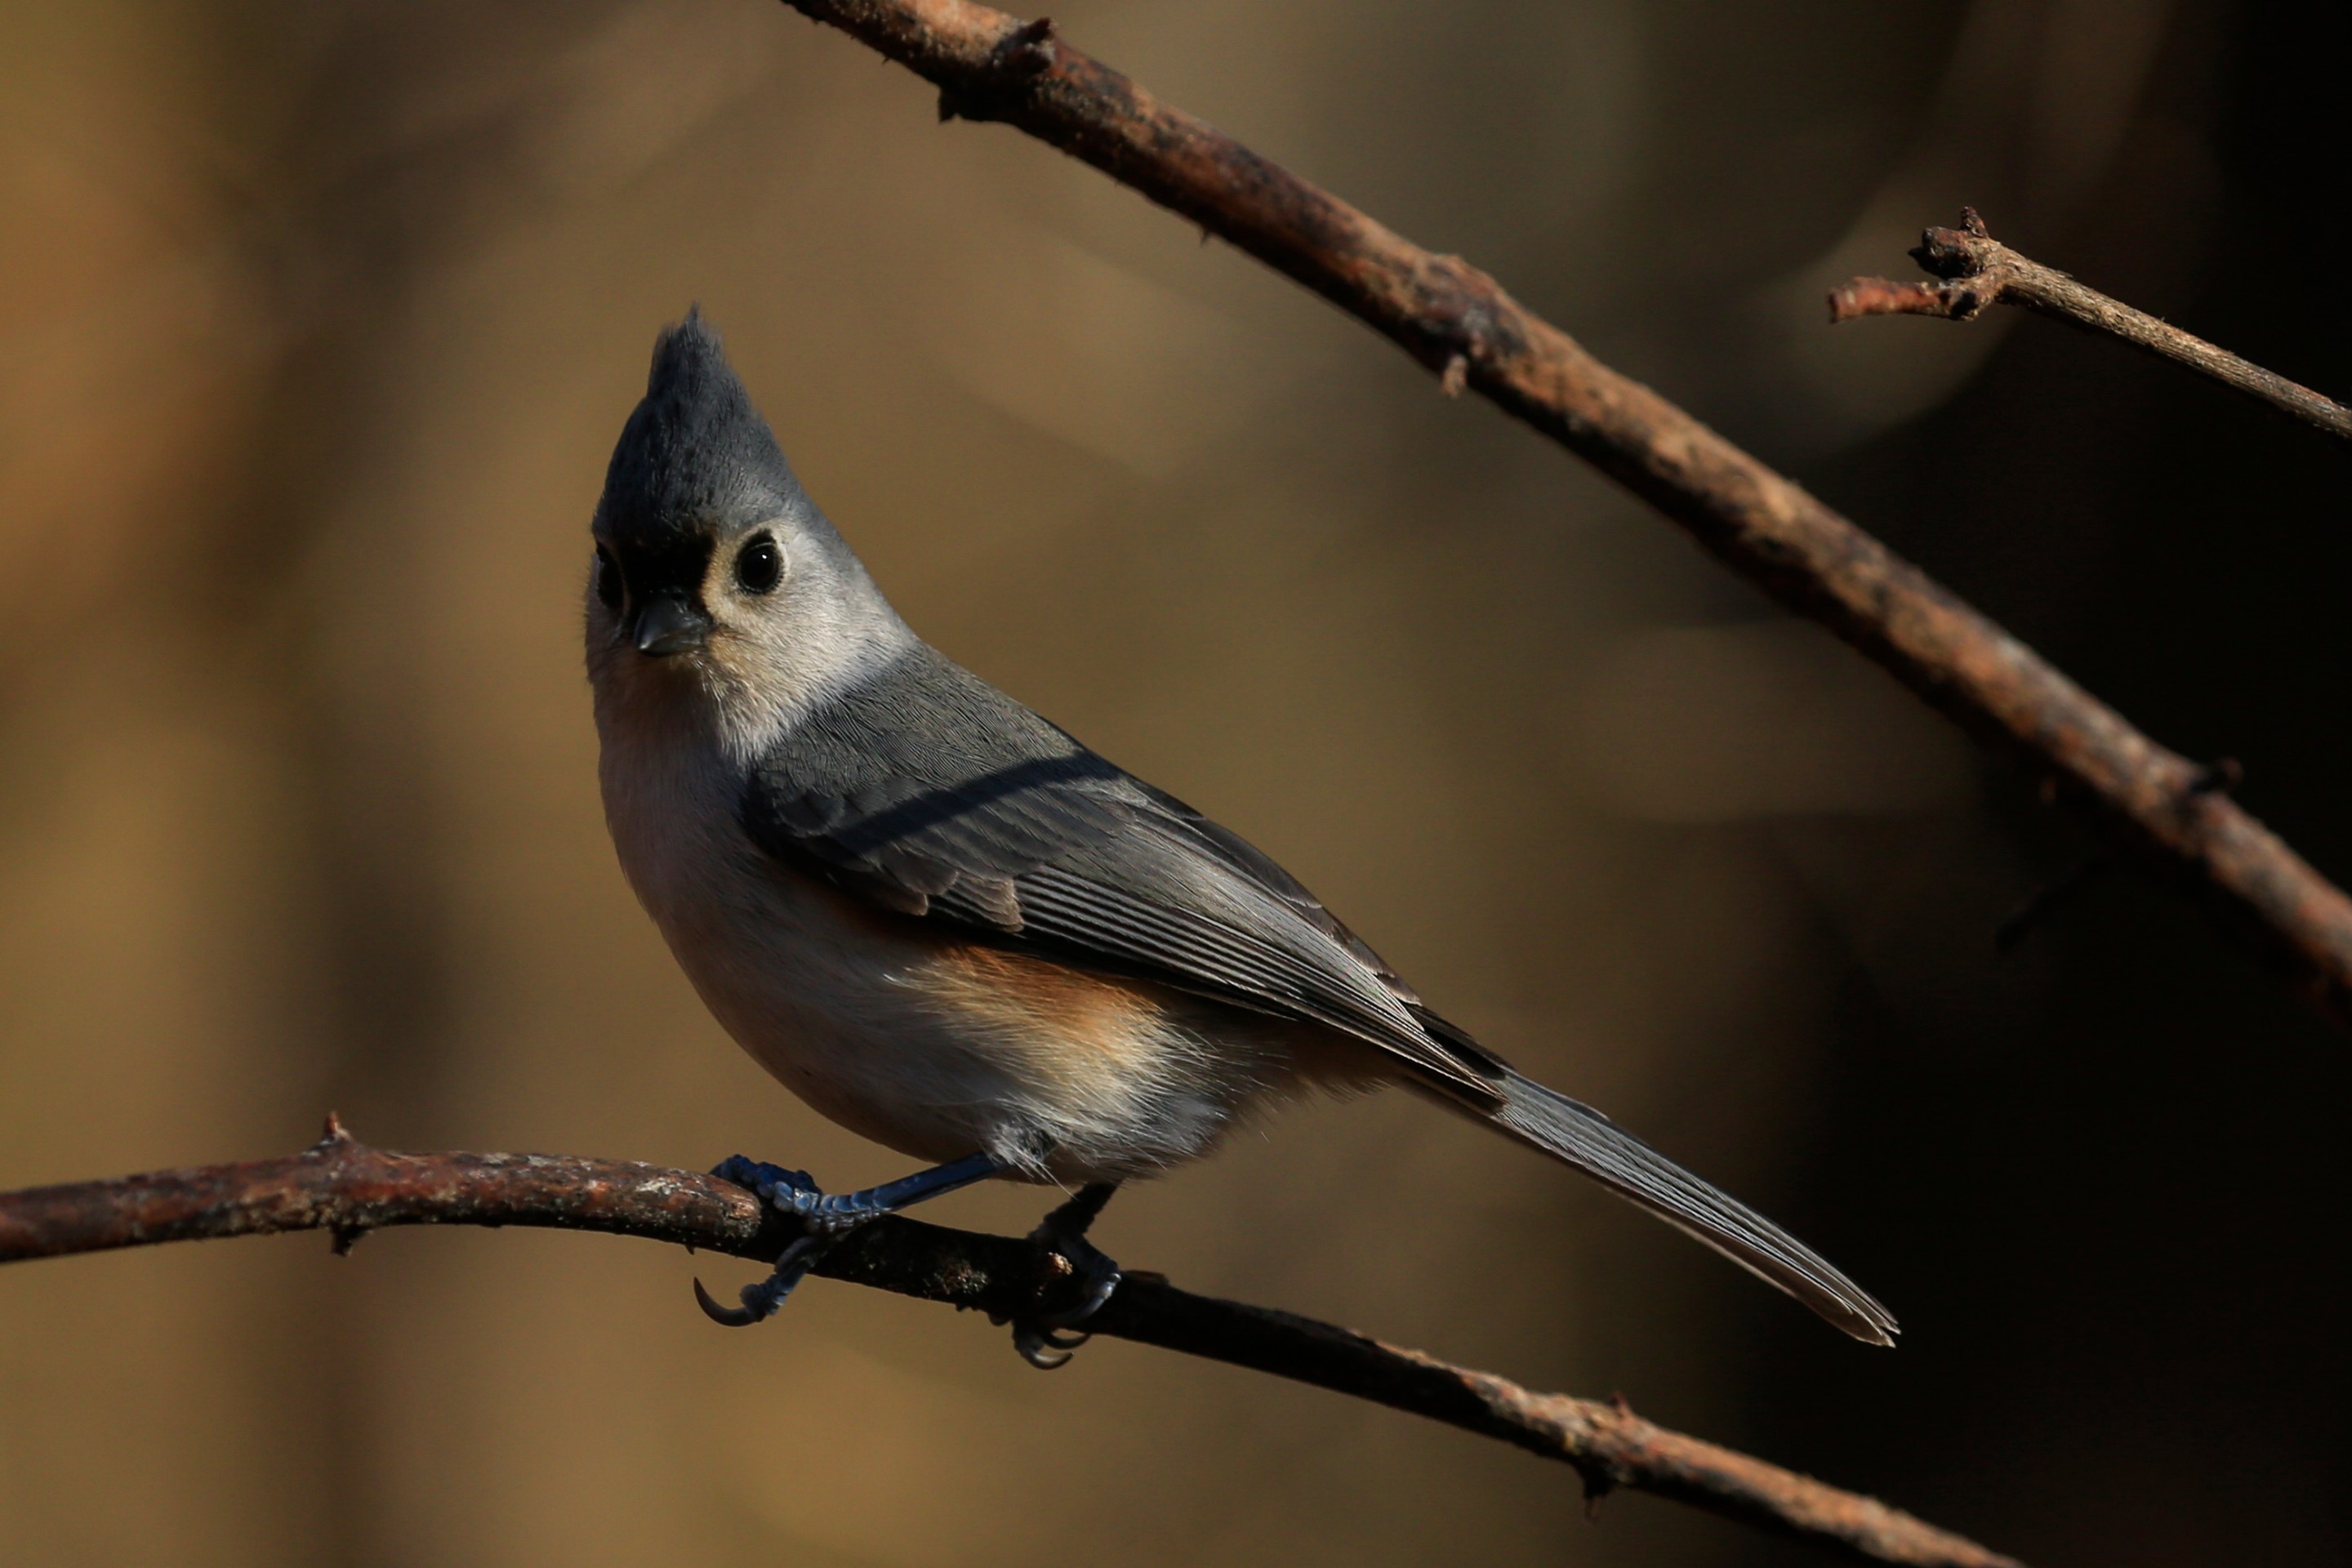 A Tufted Titmouse stands on a branch as Robert DeCandido also known as "Birding Bob" leads a group of bird watchers during a tour in Central Park, New York on November 29, 2020. - On a recent sunny morning in New York a few dozen people gathered in Central Park's wooded Ramble area with a common goal: zero in on an elusive owl. Autumn leaves crunch under their shoes as "Birding Bob" -- a guide who has been organizing birdwatching tours in the park for more than three decades, with interest jumping since the coronavirus pandemic hit the city in March -- leads them along winding paths. (Photo by Kena Betancur / AFP) (Photo by KENA BETANCUR/AFP via Getty Images)